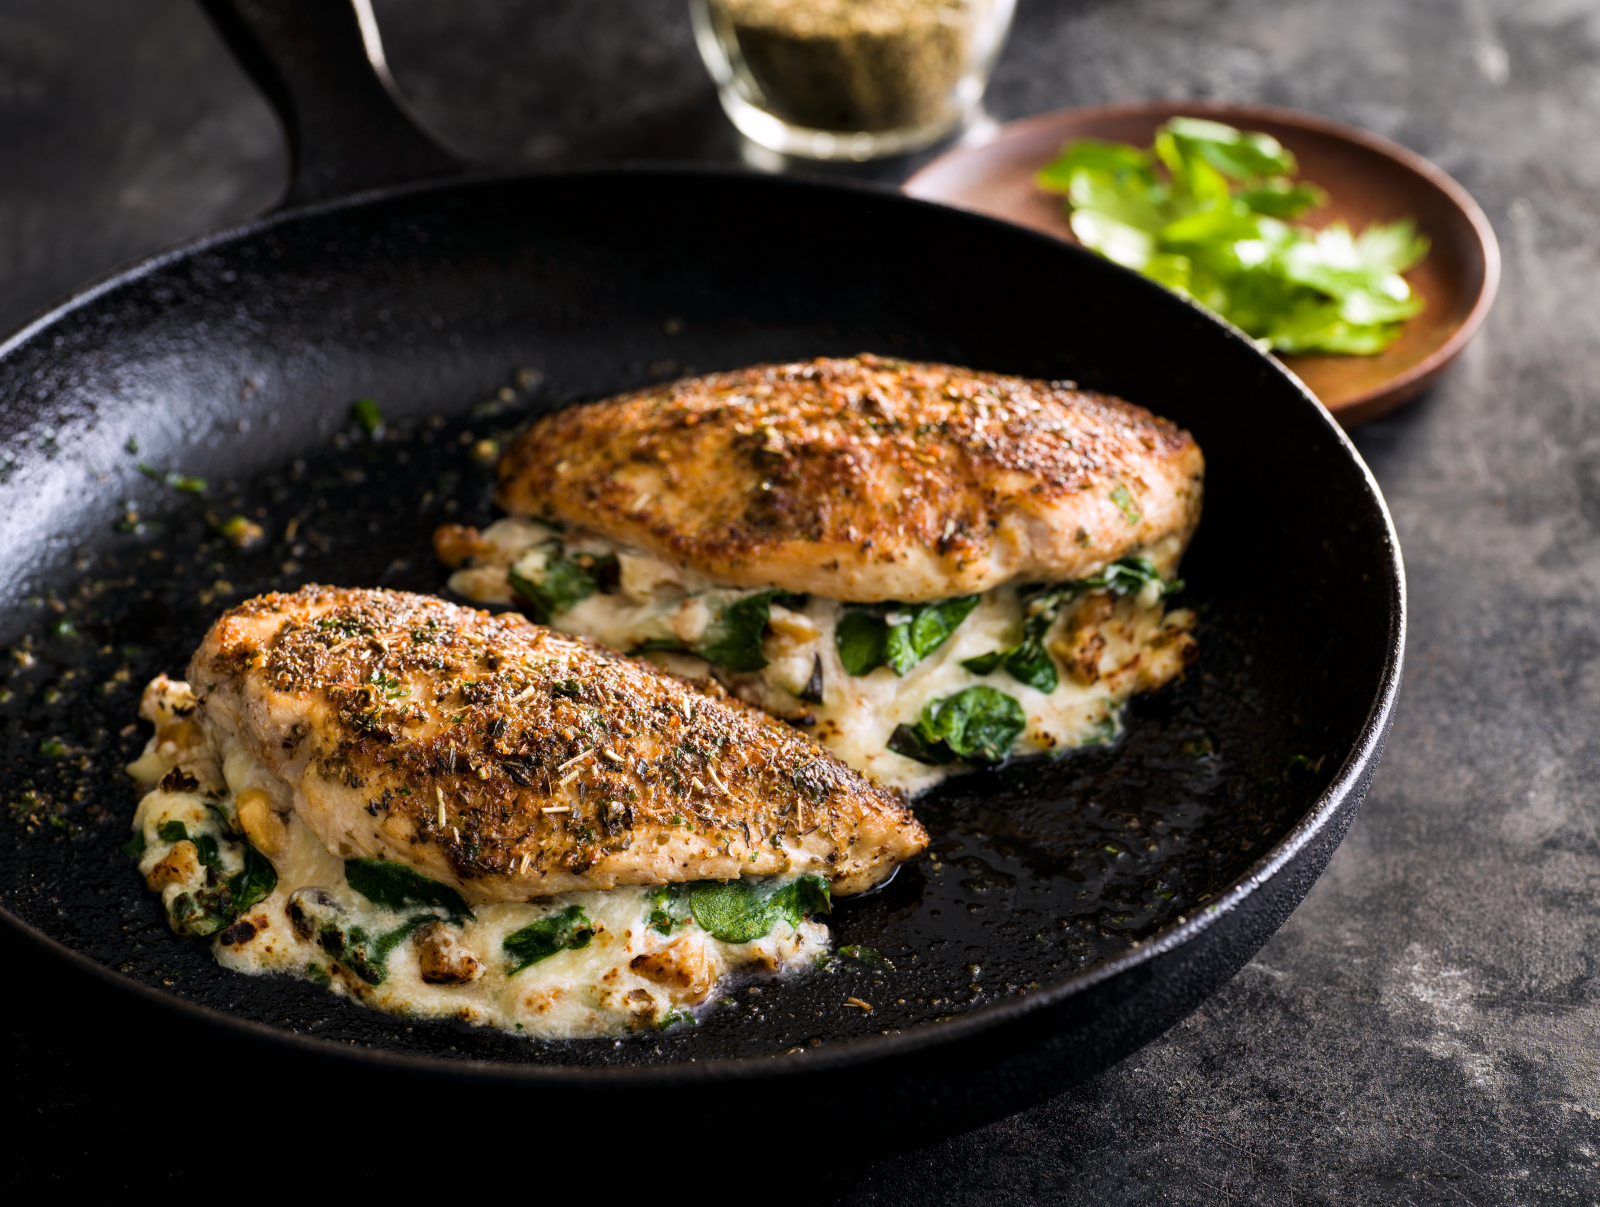 Chicken Breast Stuffed with Spinach, Ricotta and Walnuts